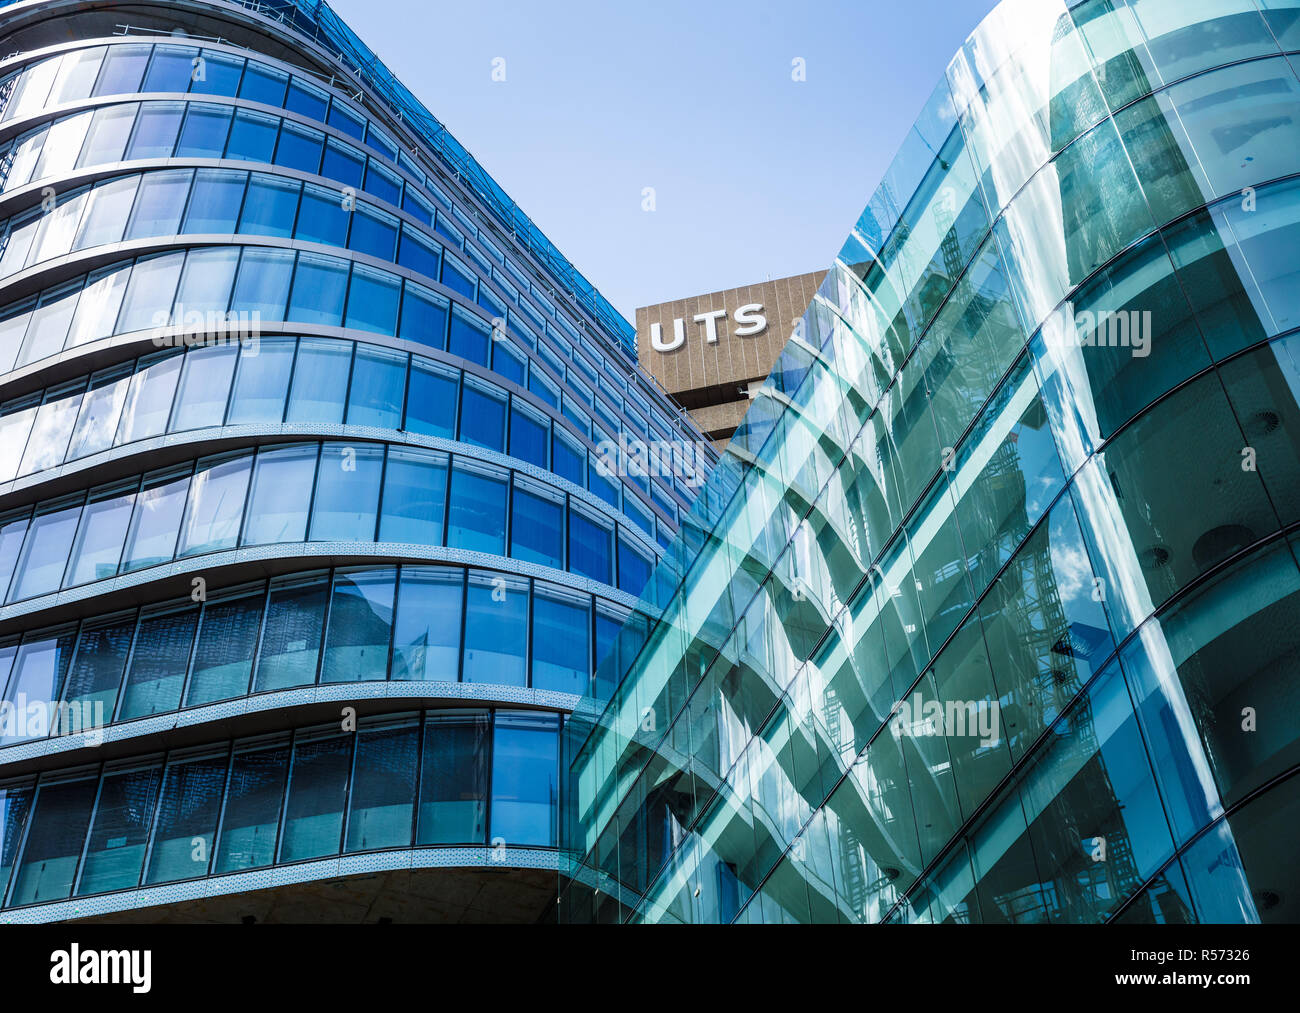 The new UTS Central building which will form the hub of student life at The University of Technology Sydney when it opens in 2019 Stock Photo